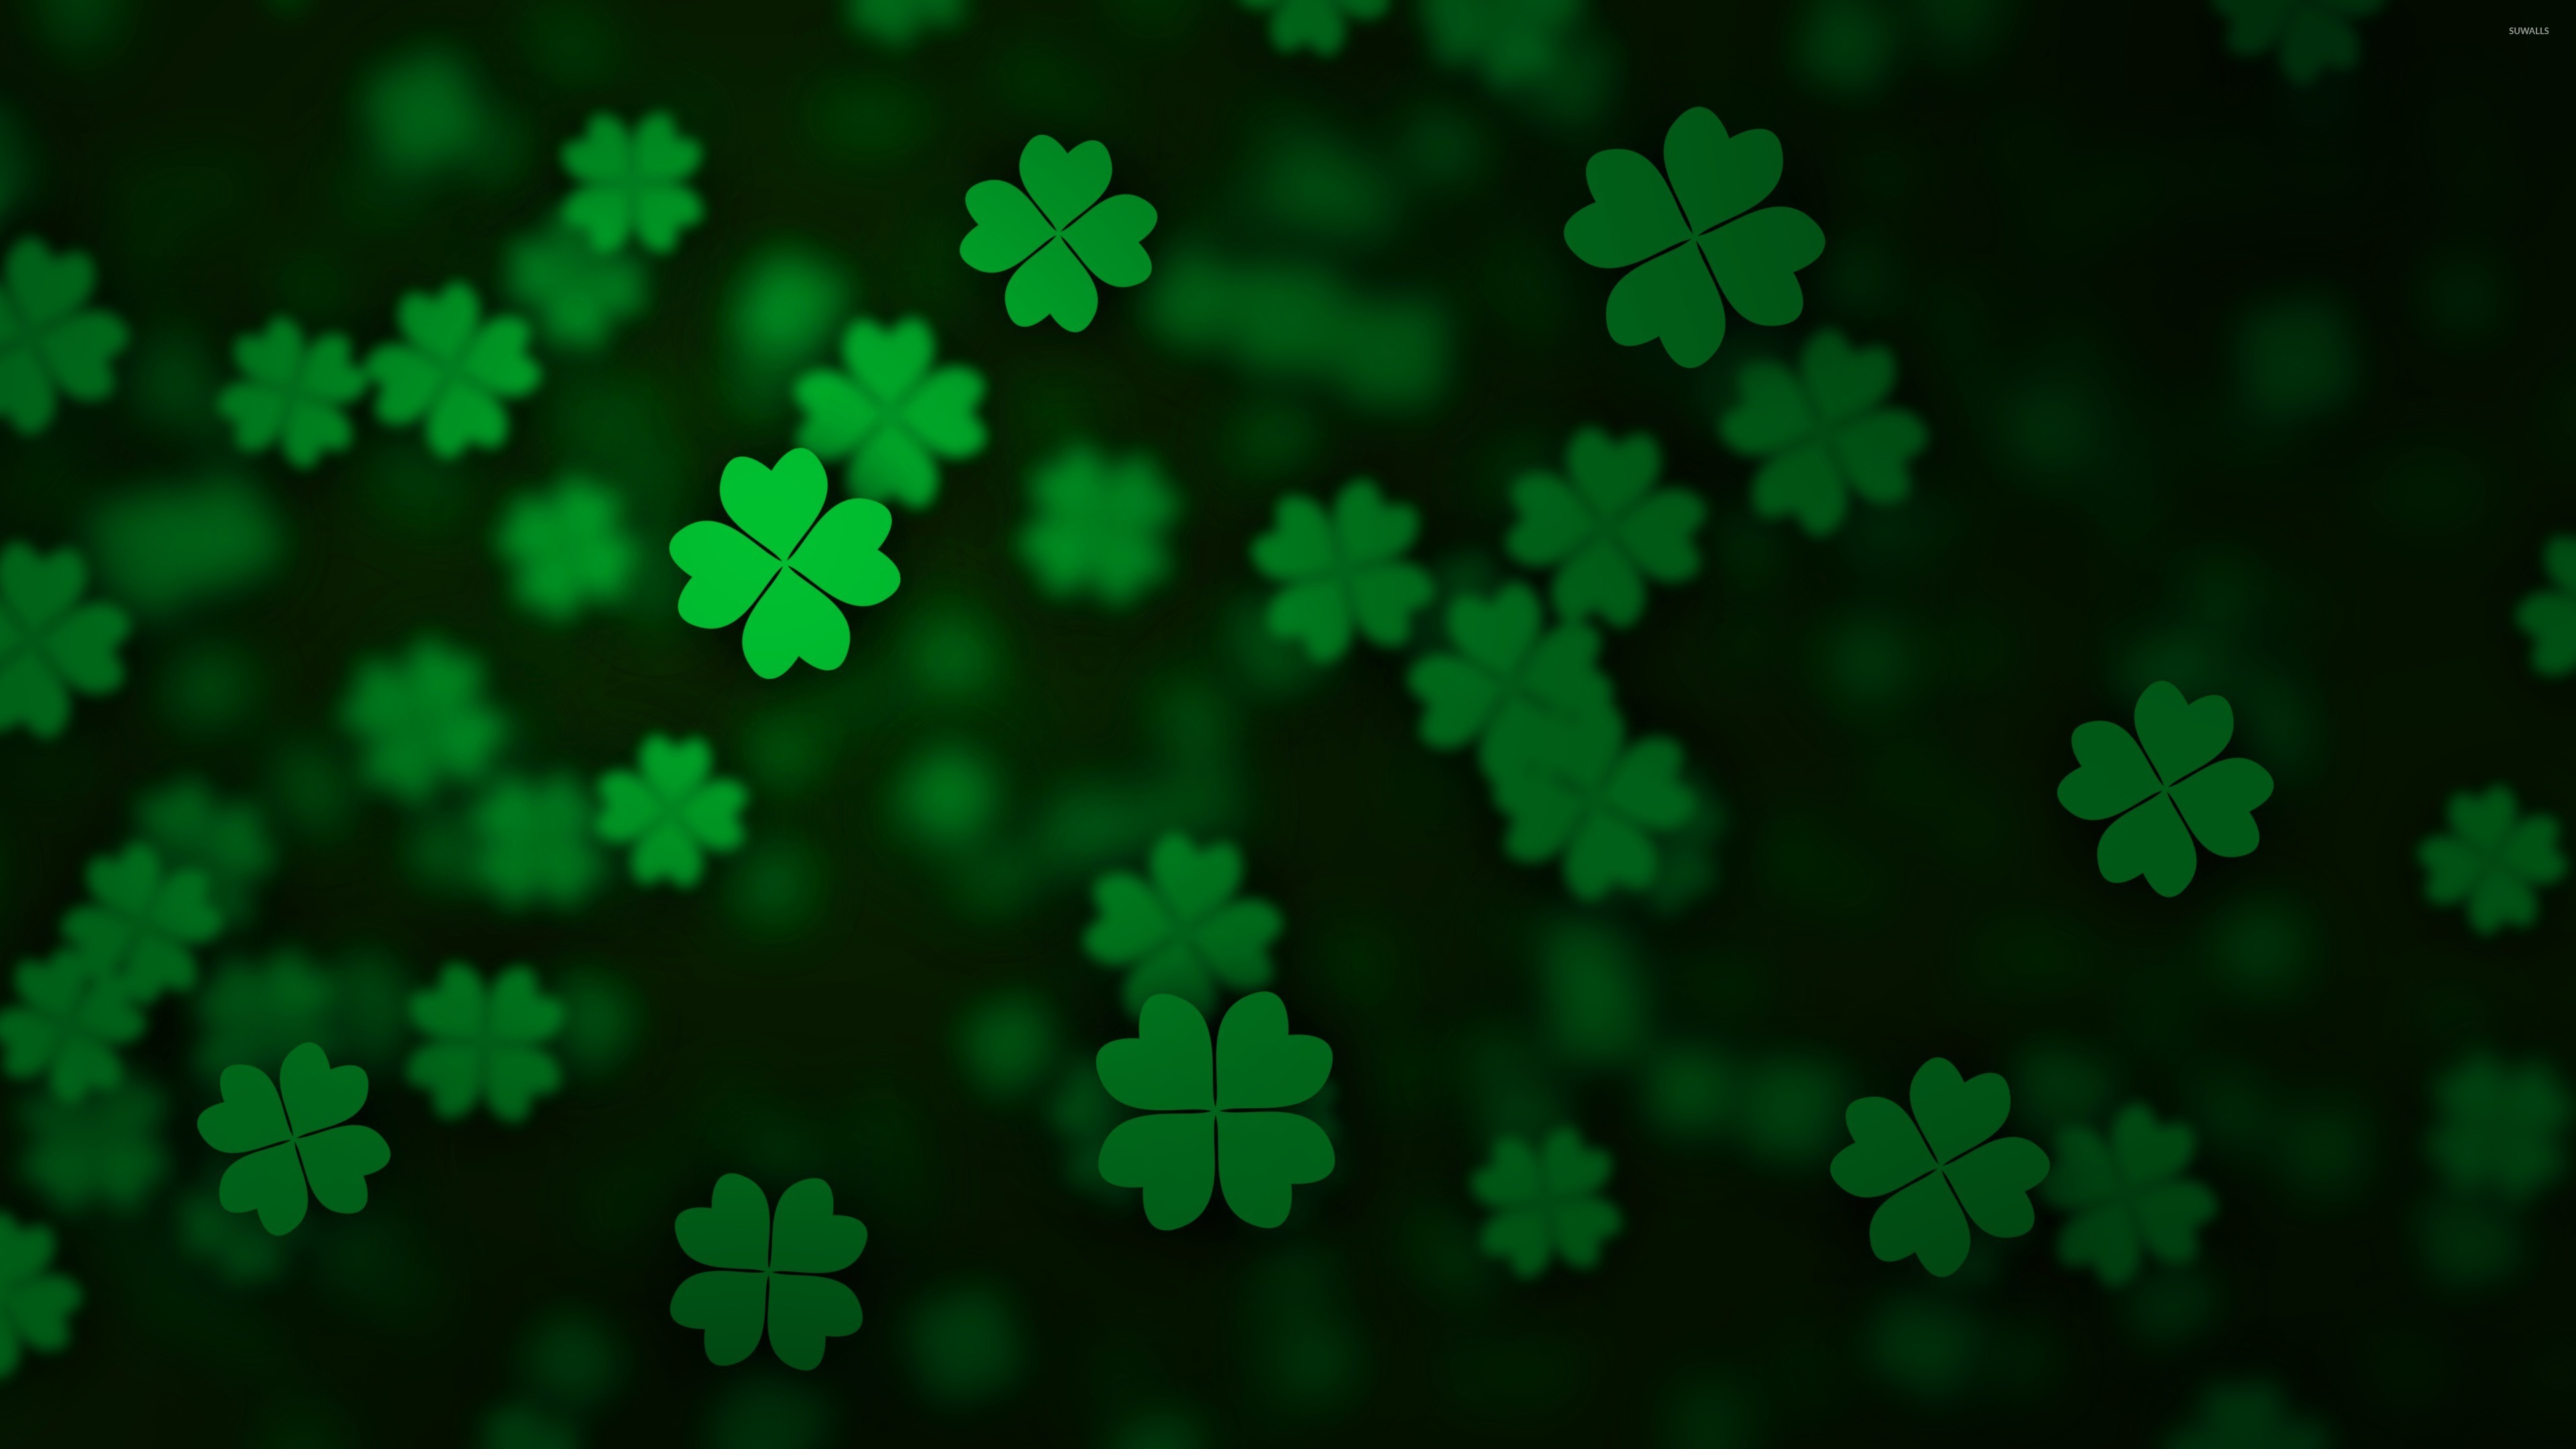 Floating Clovers Wallpaper Holiday Wallpapers 52888 HD Wallpapers Download Free Map Images Wallpaper [wallpaper376.blogspot.com]